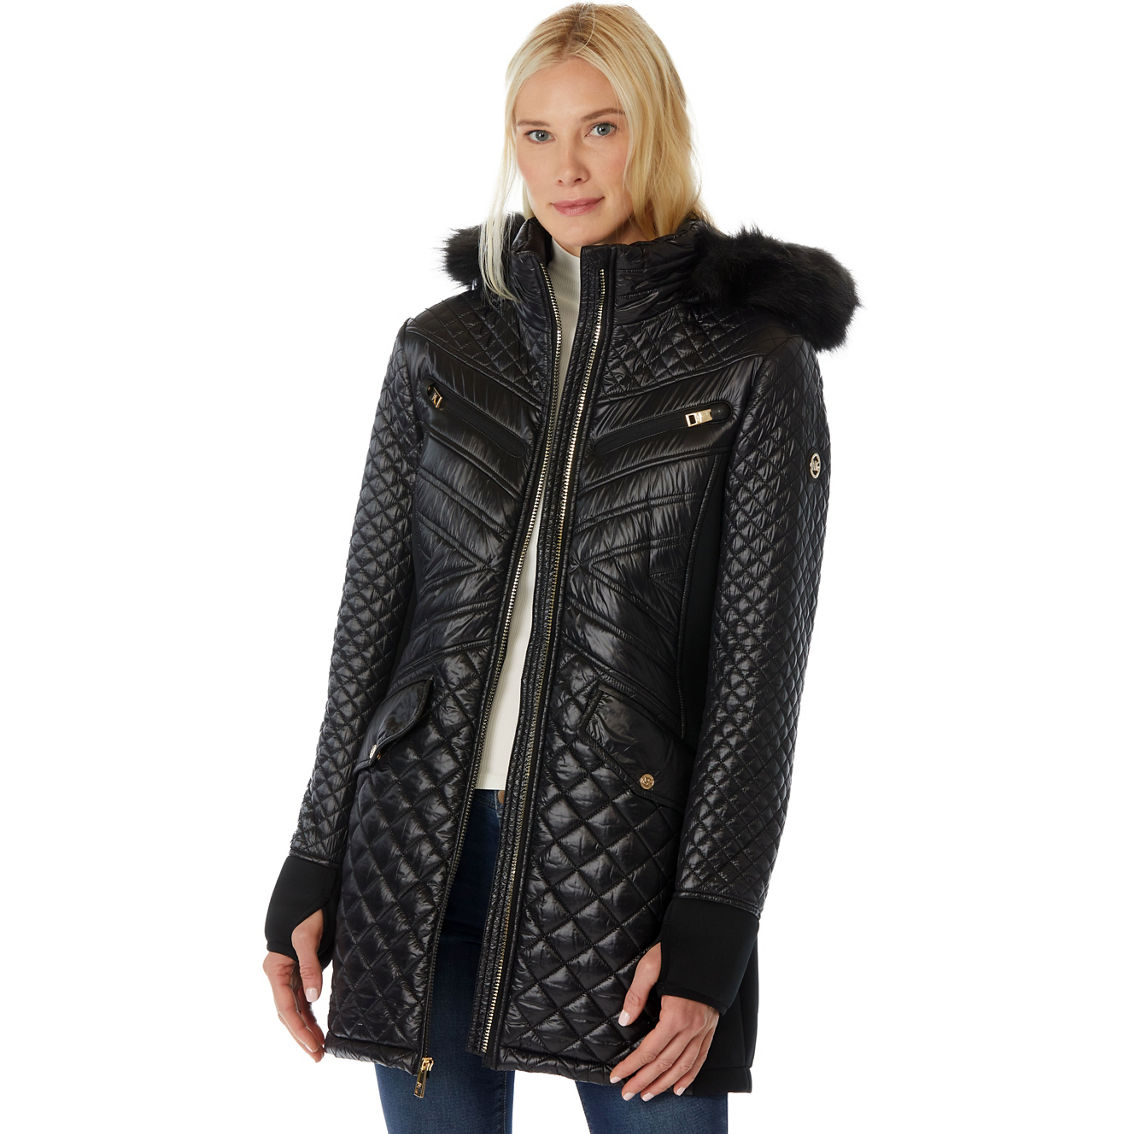 Michael Kors QUILTED faux Fur trimmed jacket - Image 4 of 4